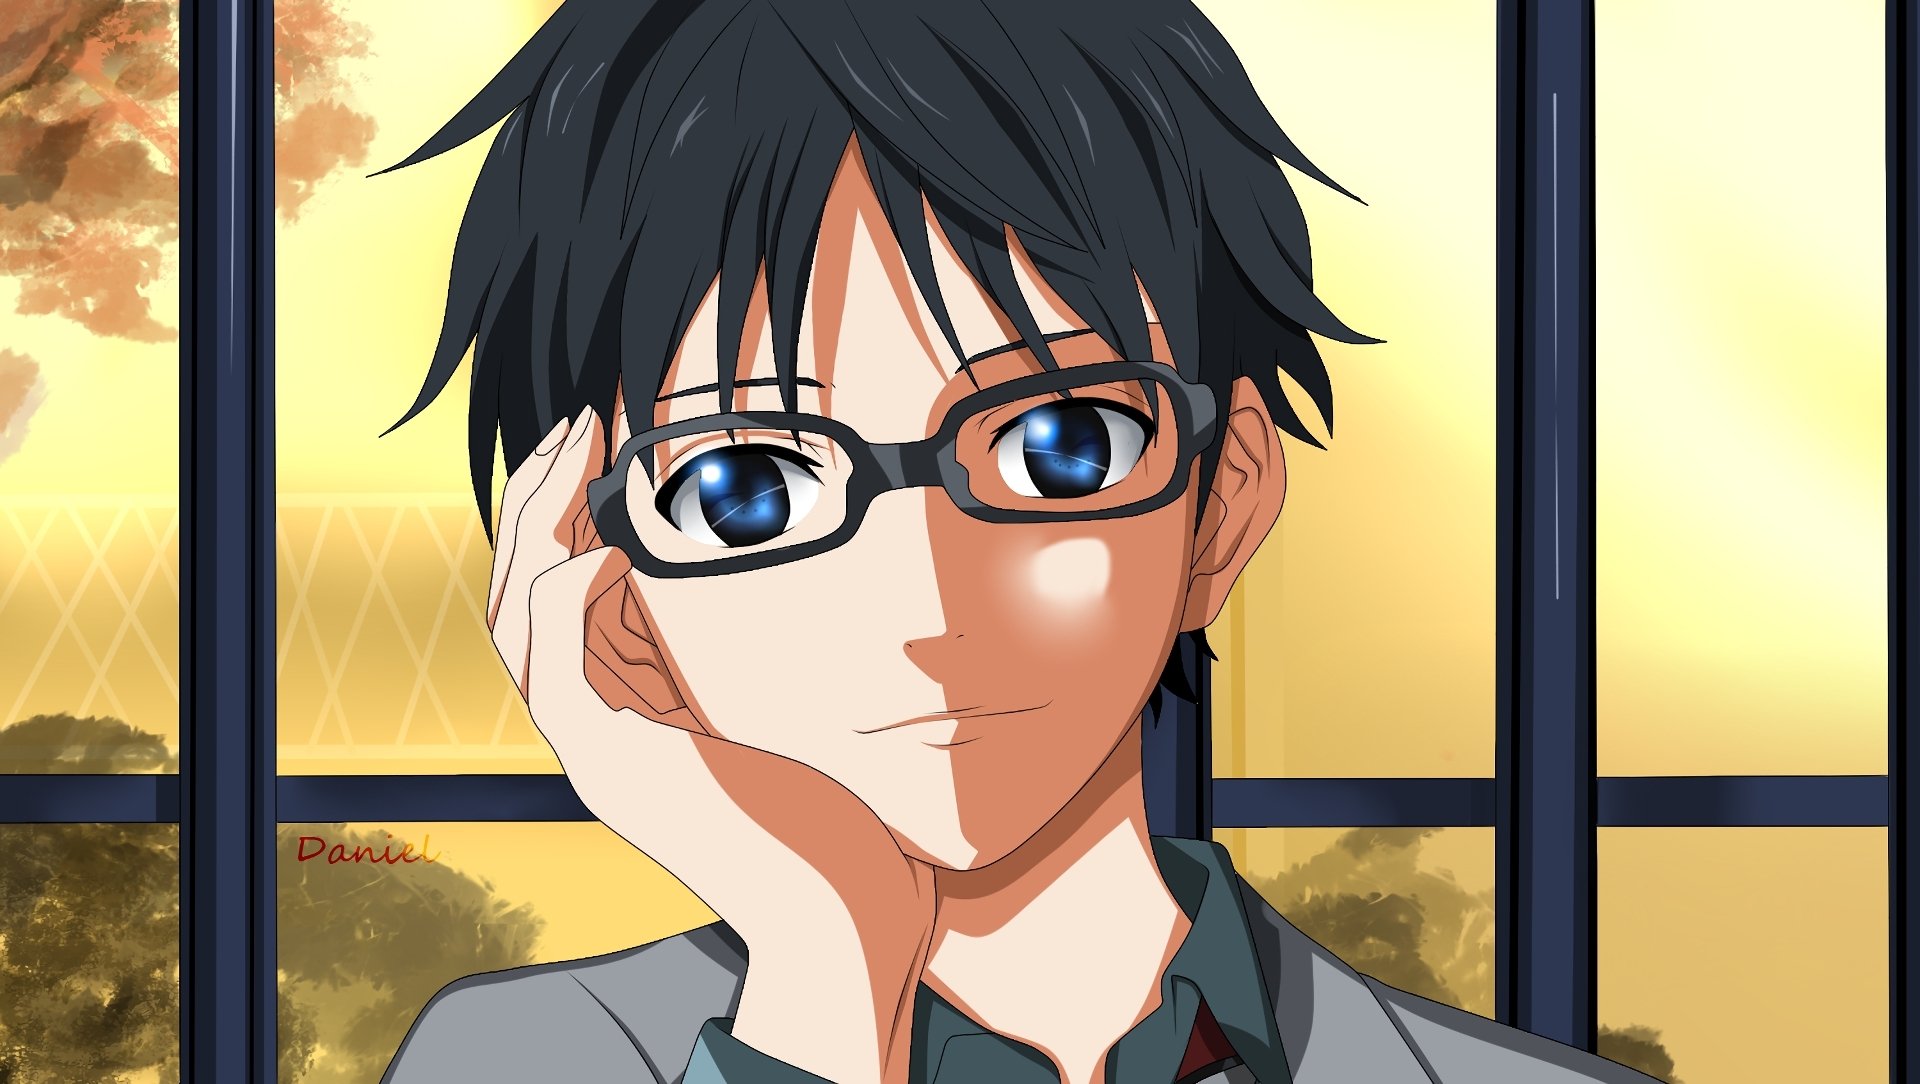 8. Kousei Arima from Your Lie in April - wide 4